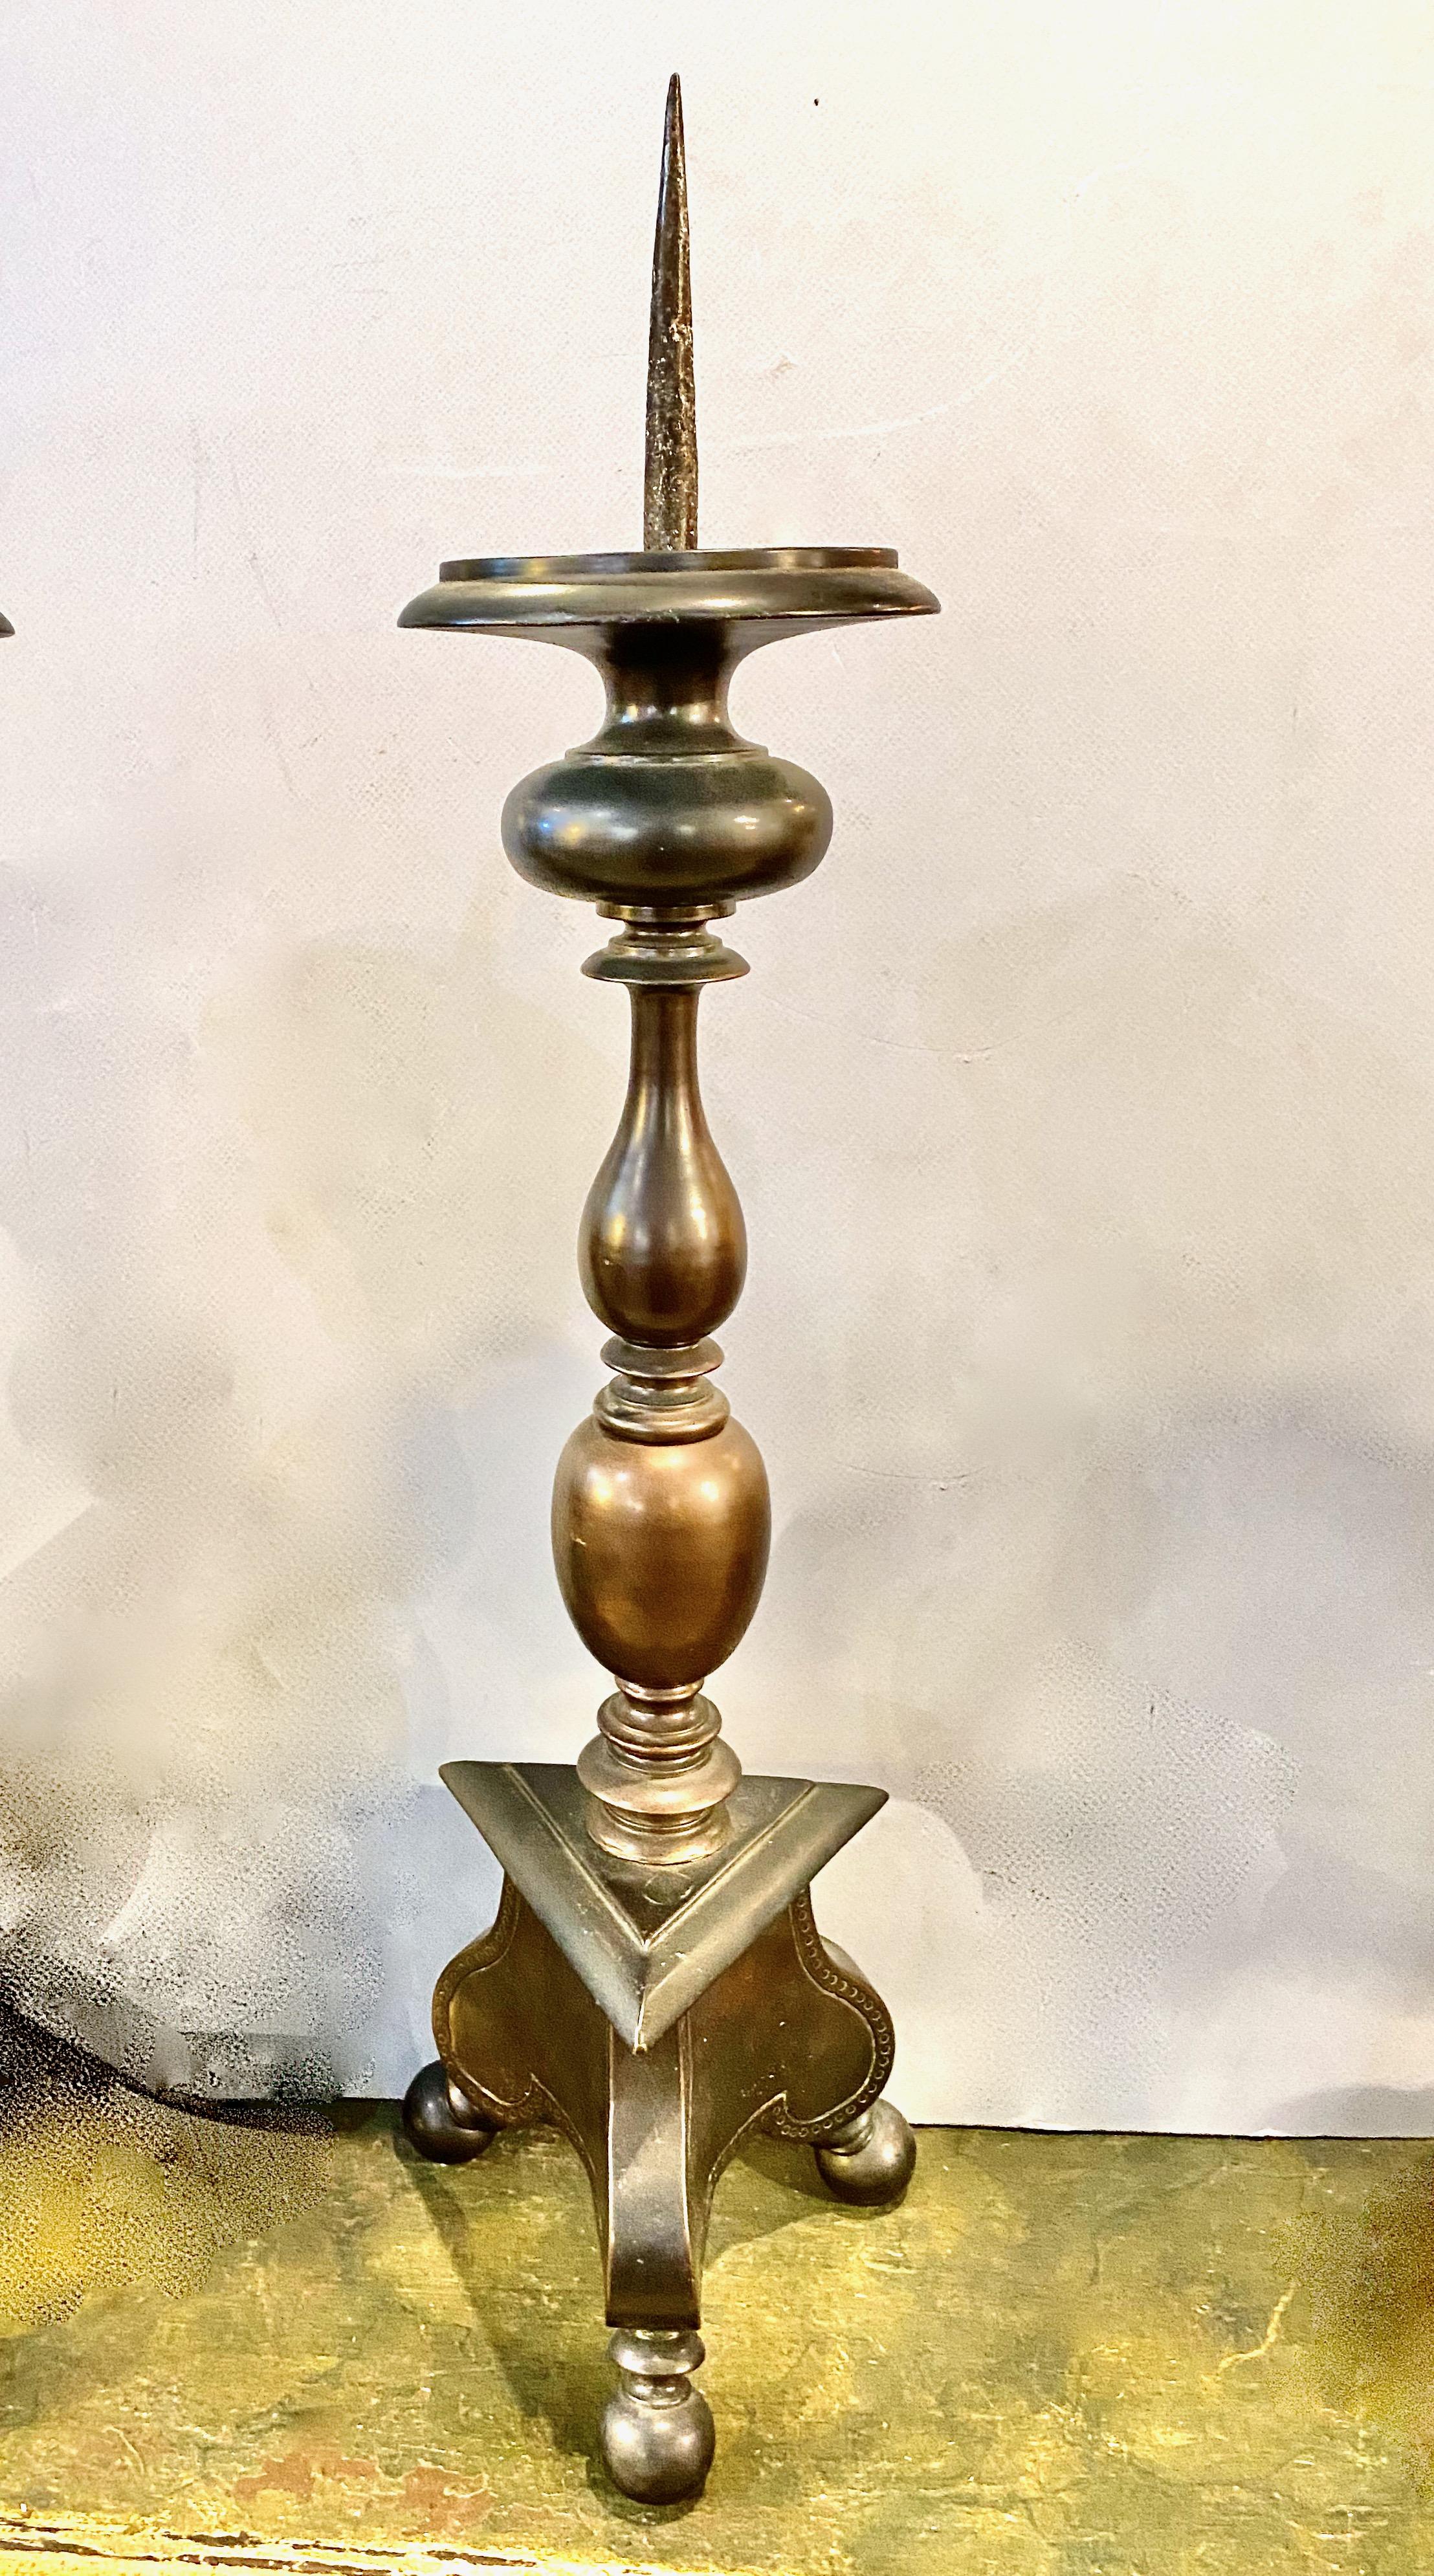 This is a good example of early 18th century Italian solid bronze pricket candlesticks. The tripartite base is supported by ball feet and is detailed with a hammered design. These large sticks measure 22 inches in height, excluding the pricket. One